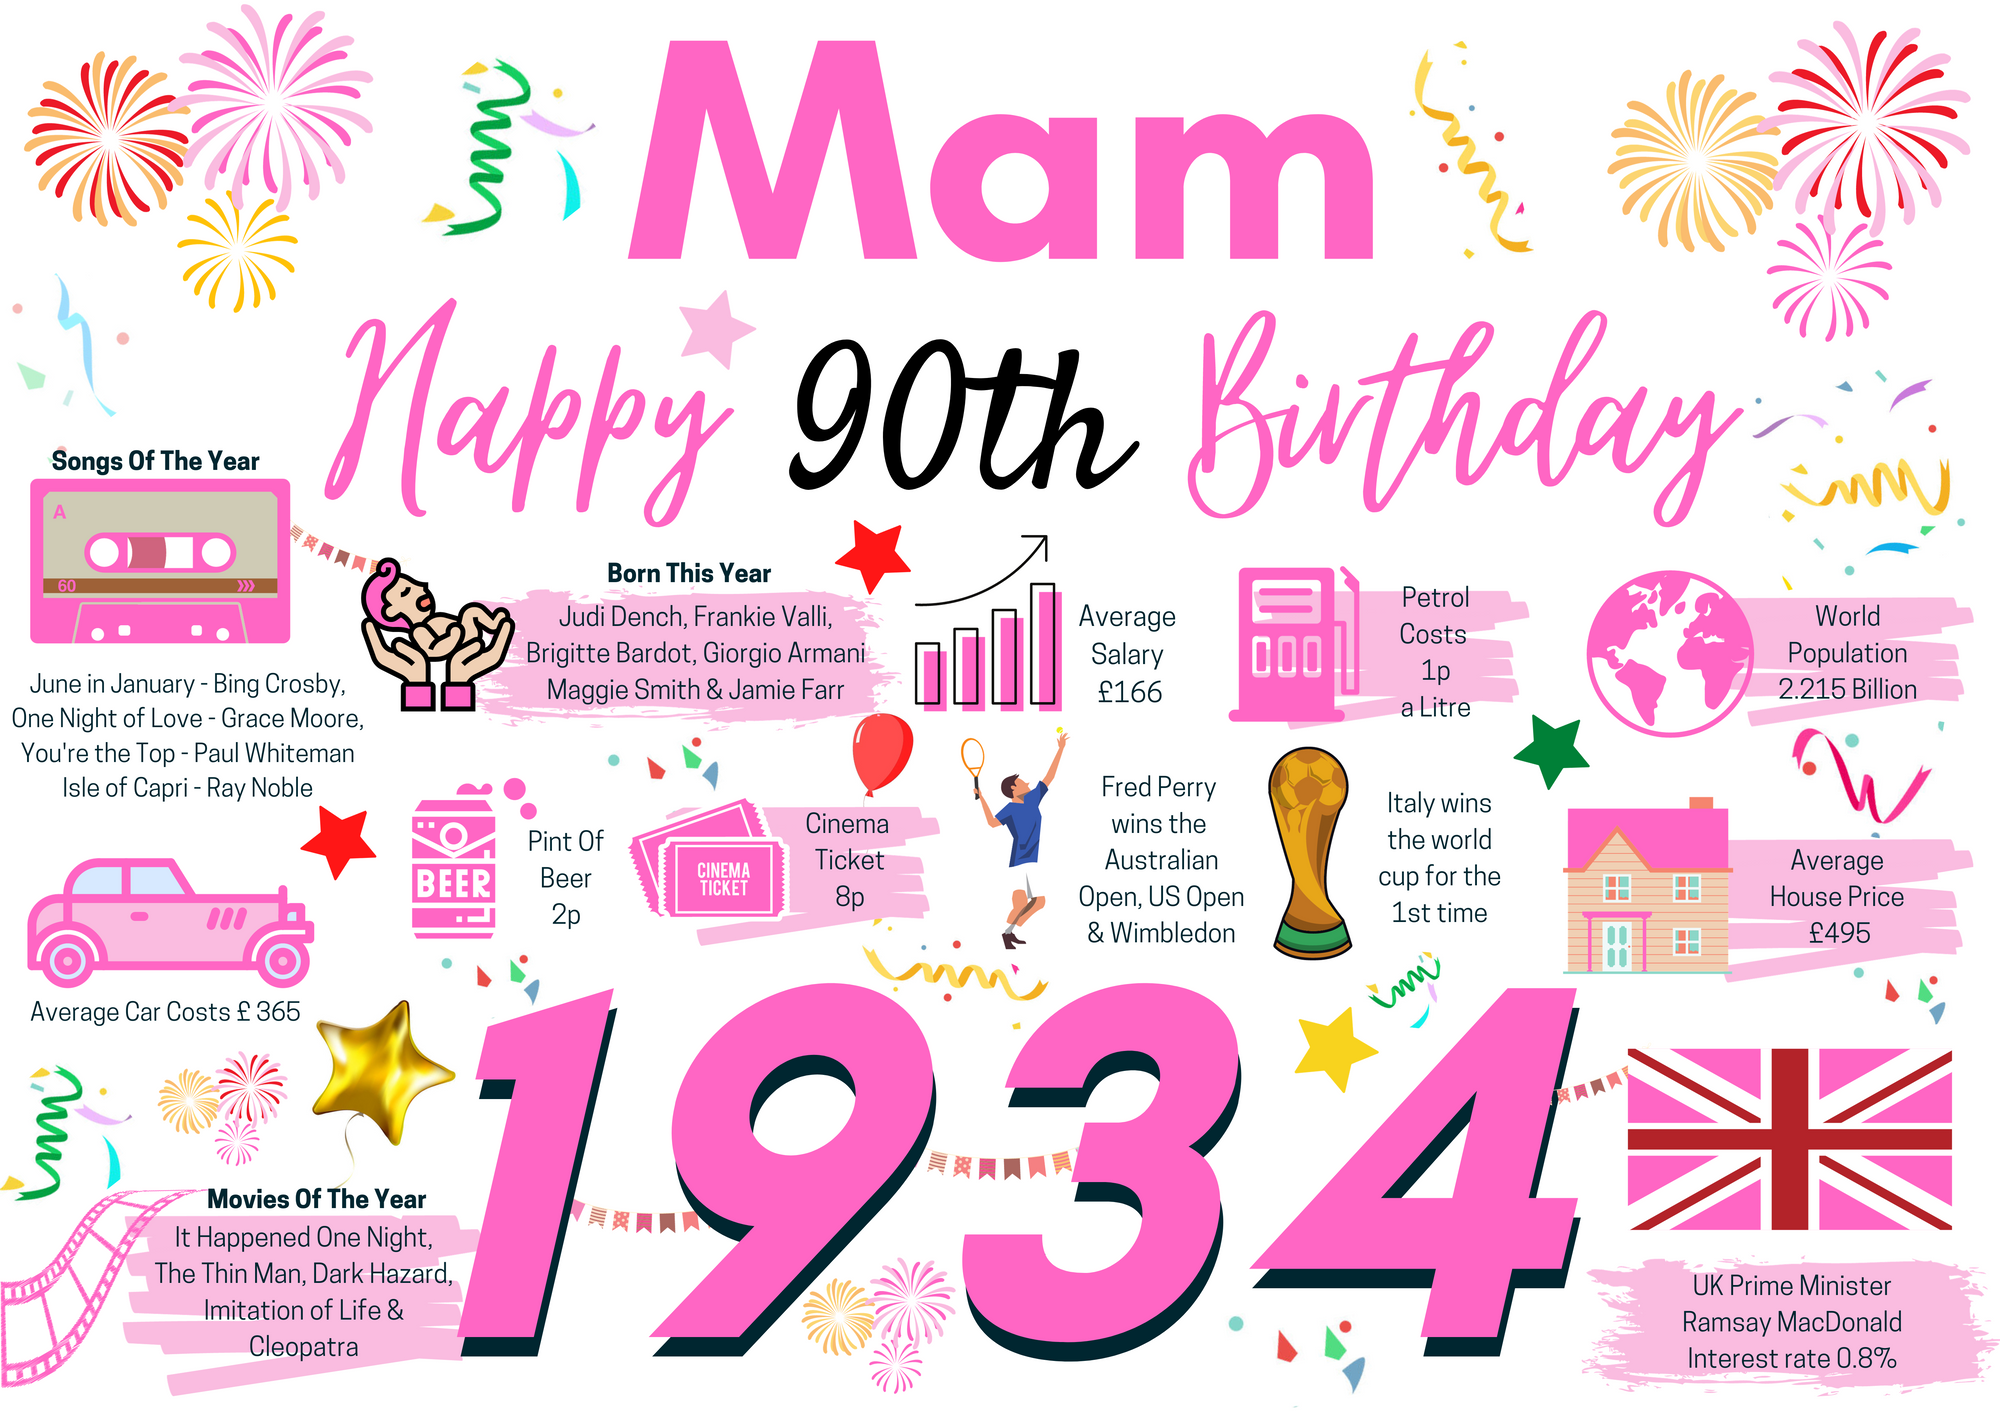 90th Birthday Card For Mam, Pink Birthday Card , Happy 90th Greetings Card Born In 1934 Facts